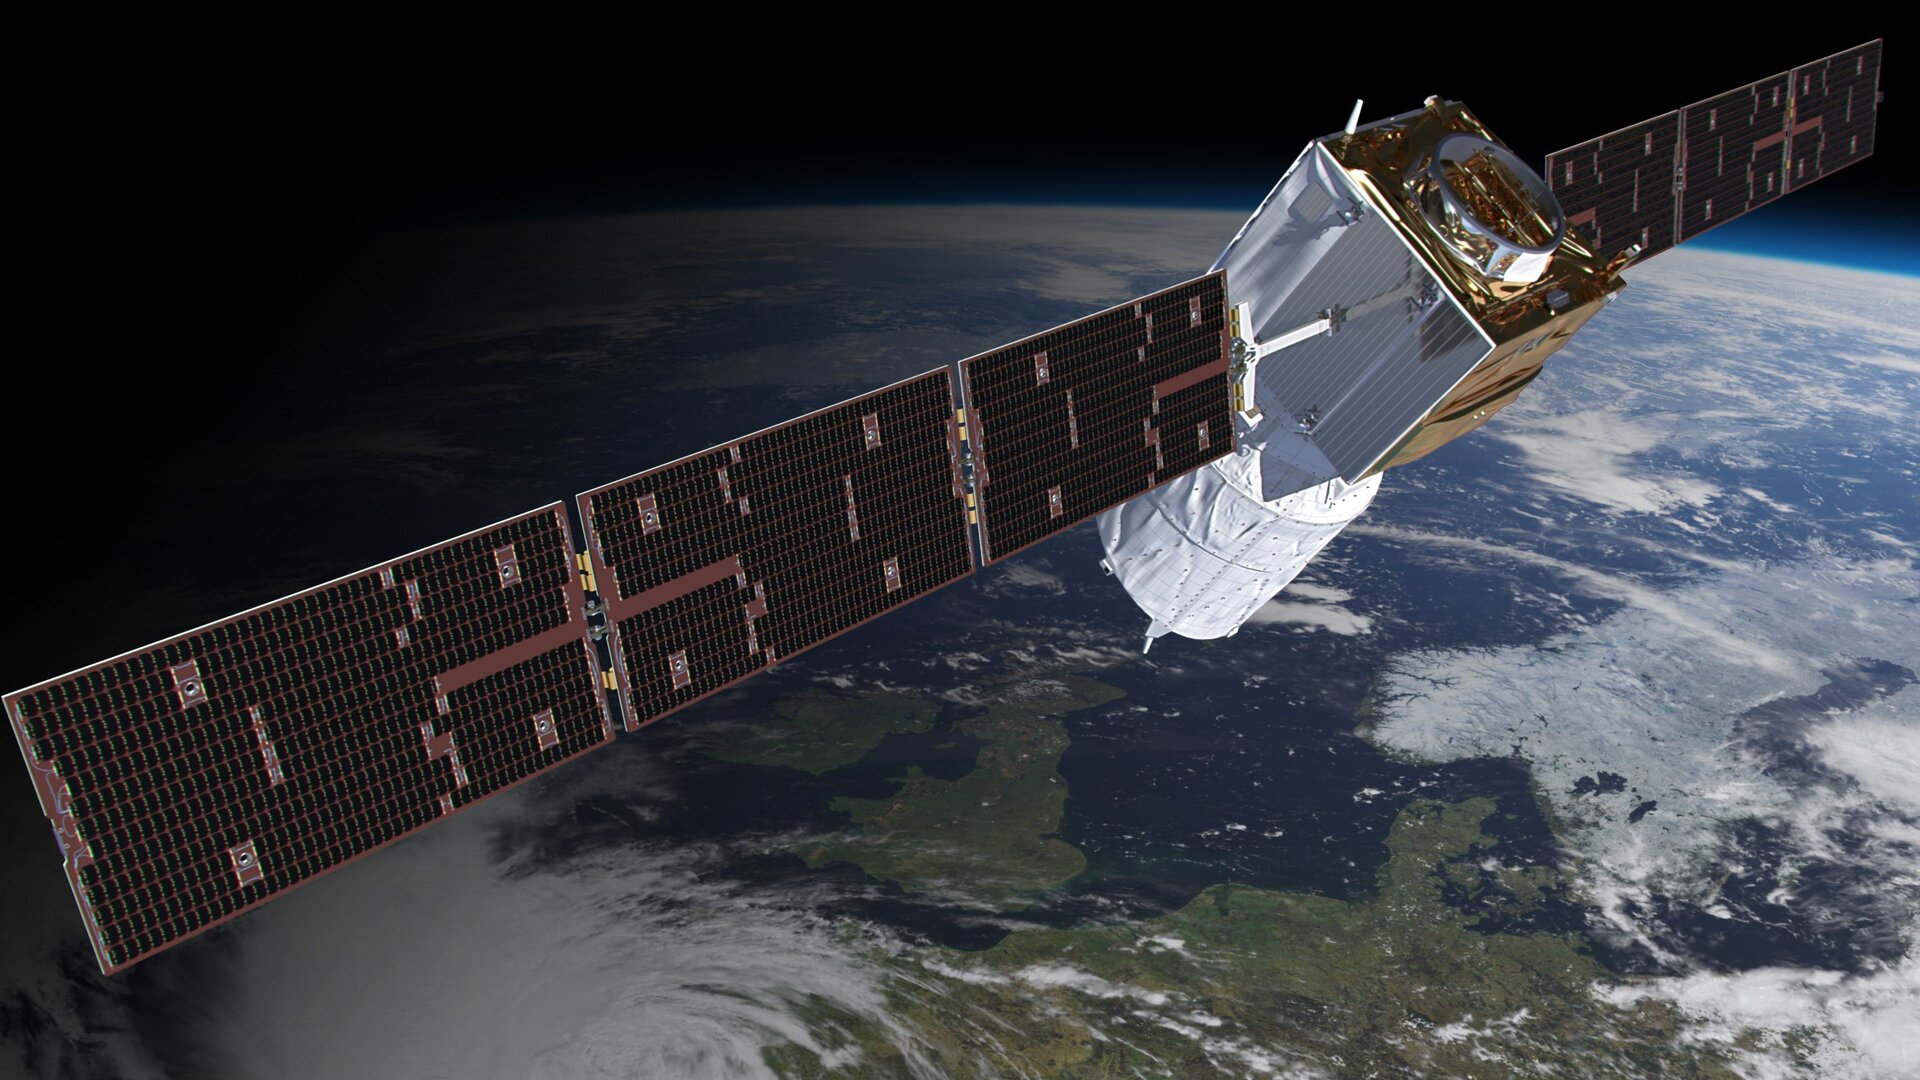 Helmes Became a Software Development Partner for the European Space Agency